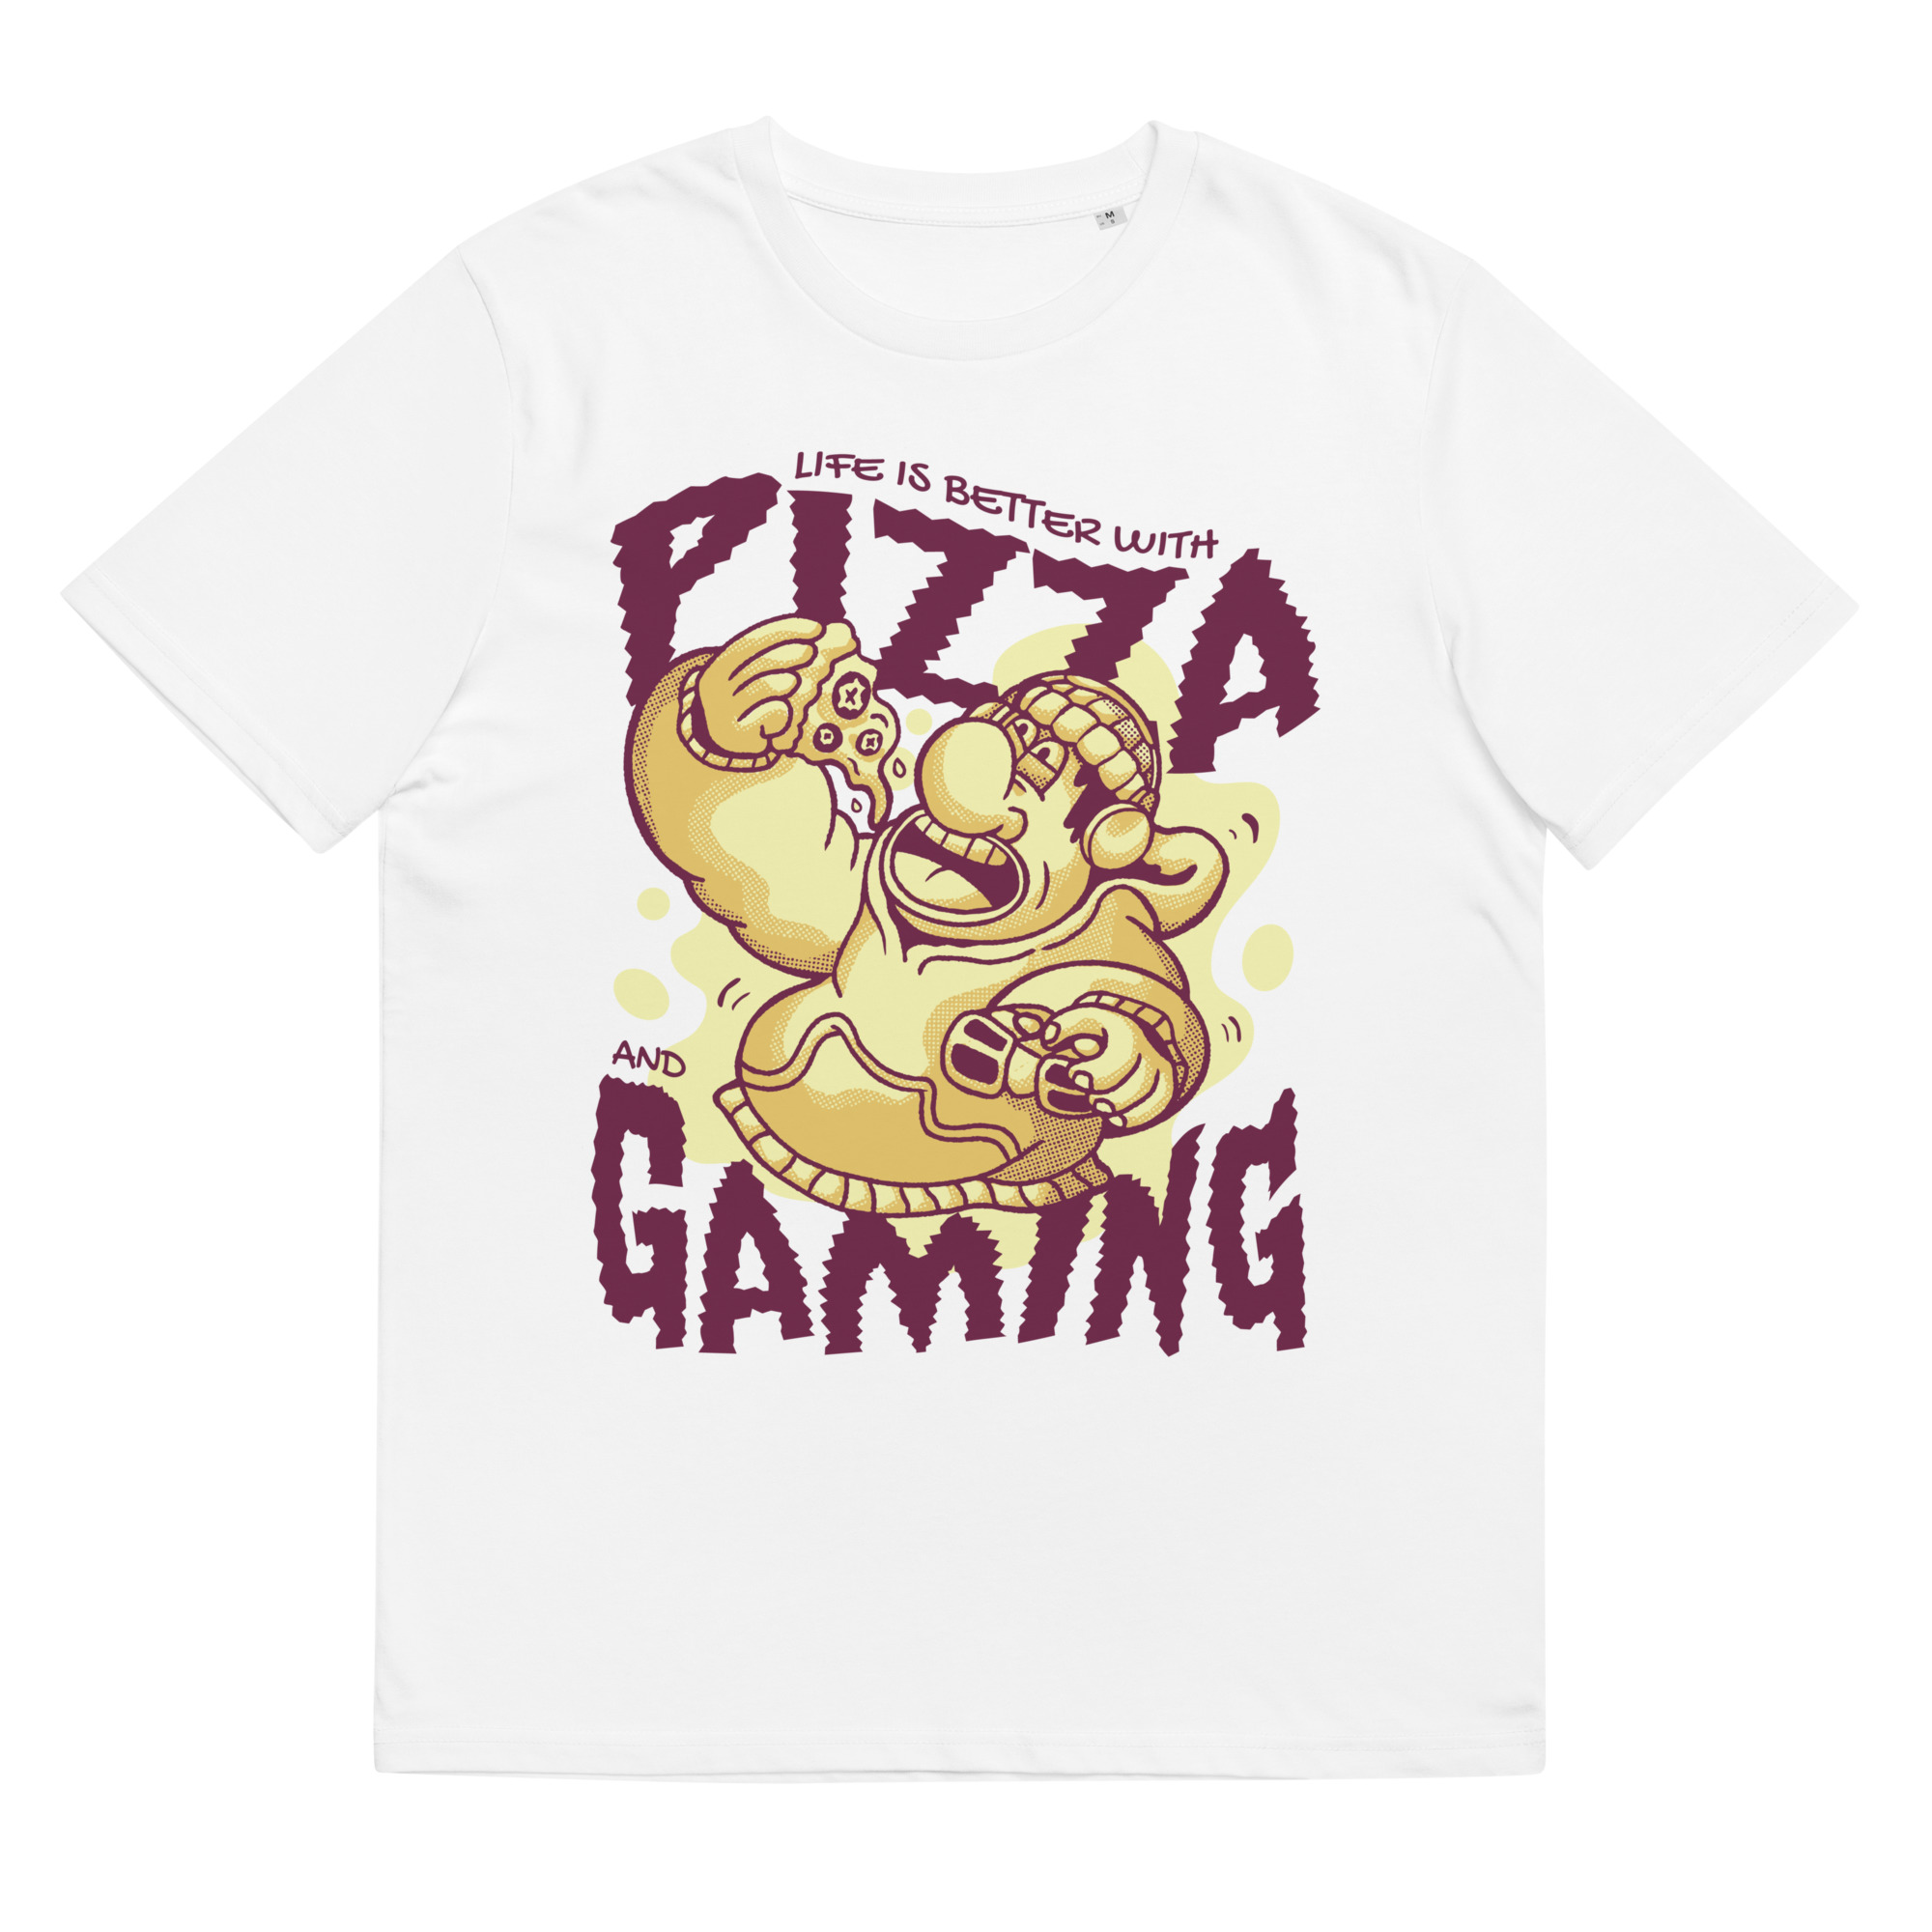 Life Is Better With Pizza And Gaming - Organic Unisex Pizza T-Shirt